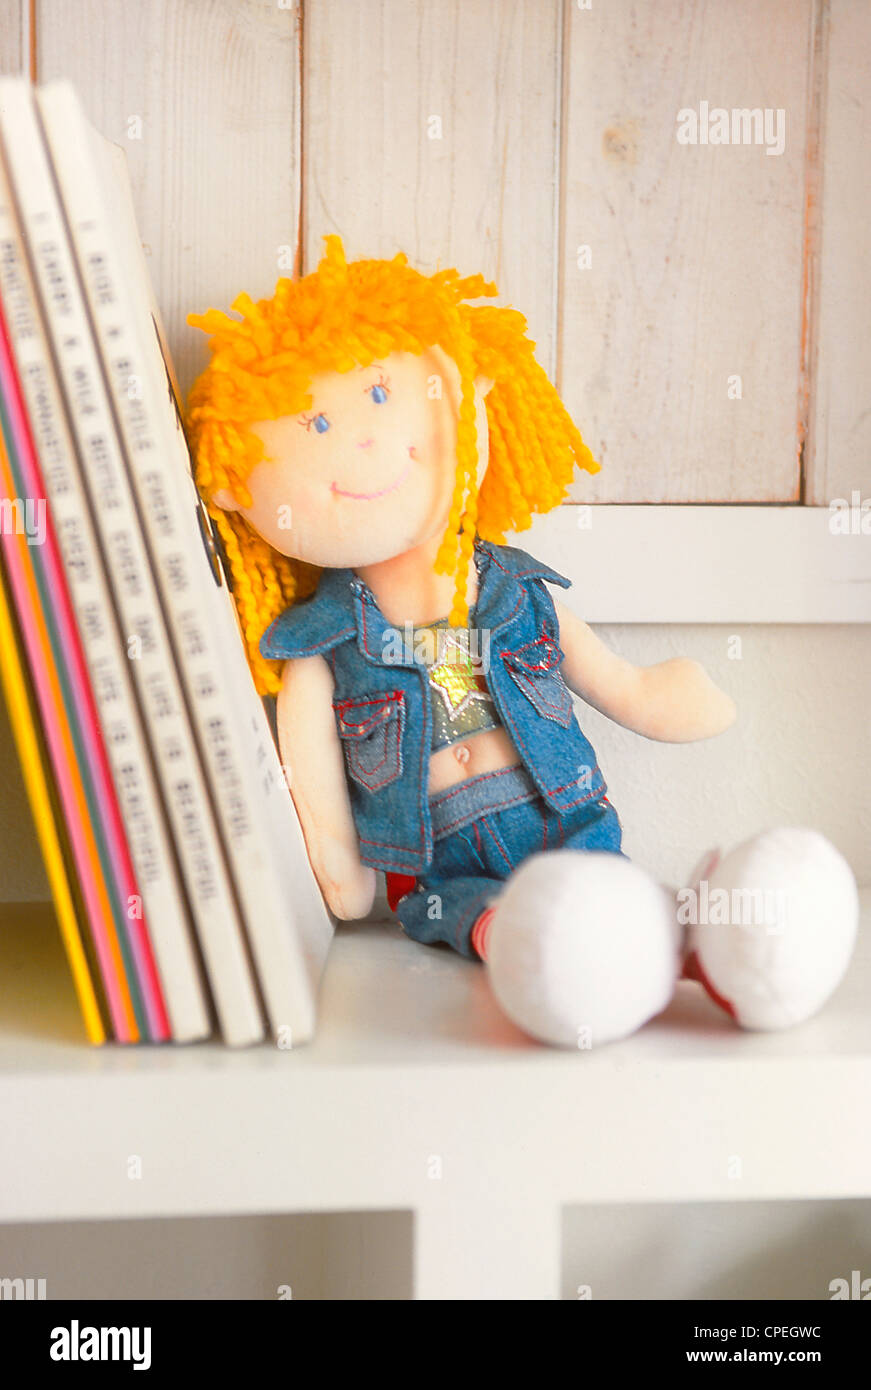 Close Up View Of Doll In Shelf Stock Photo